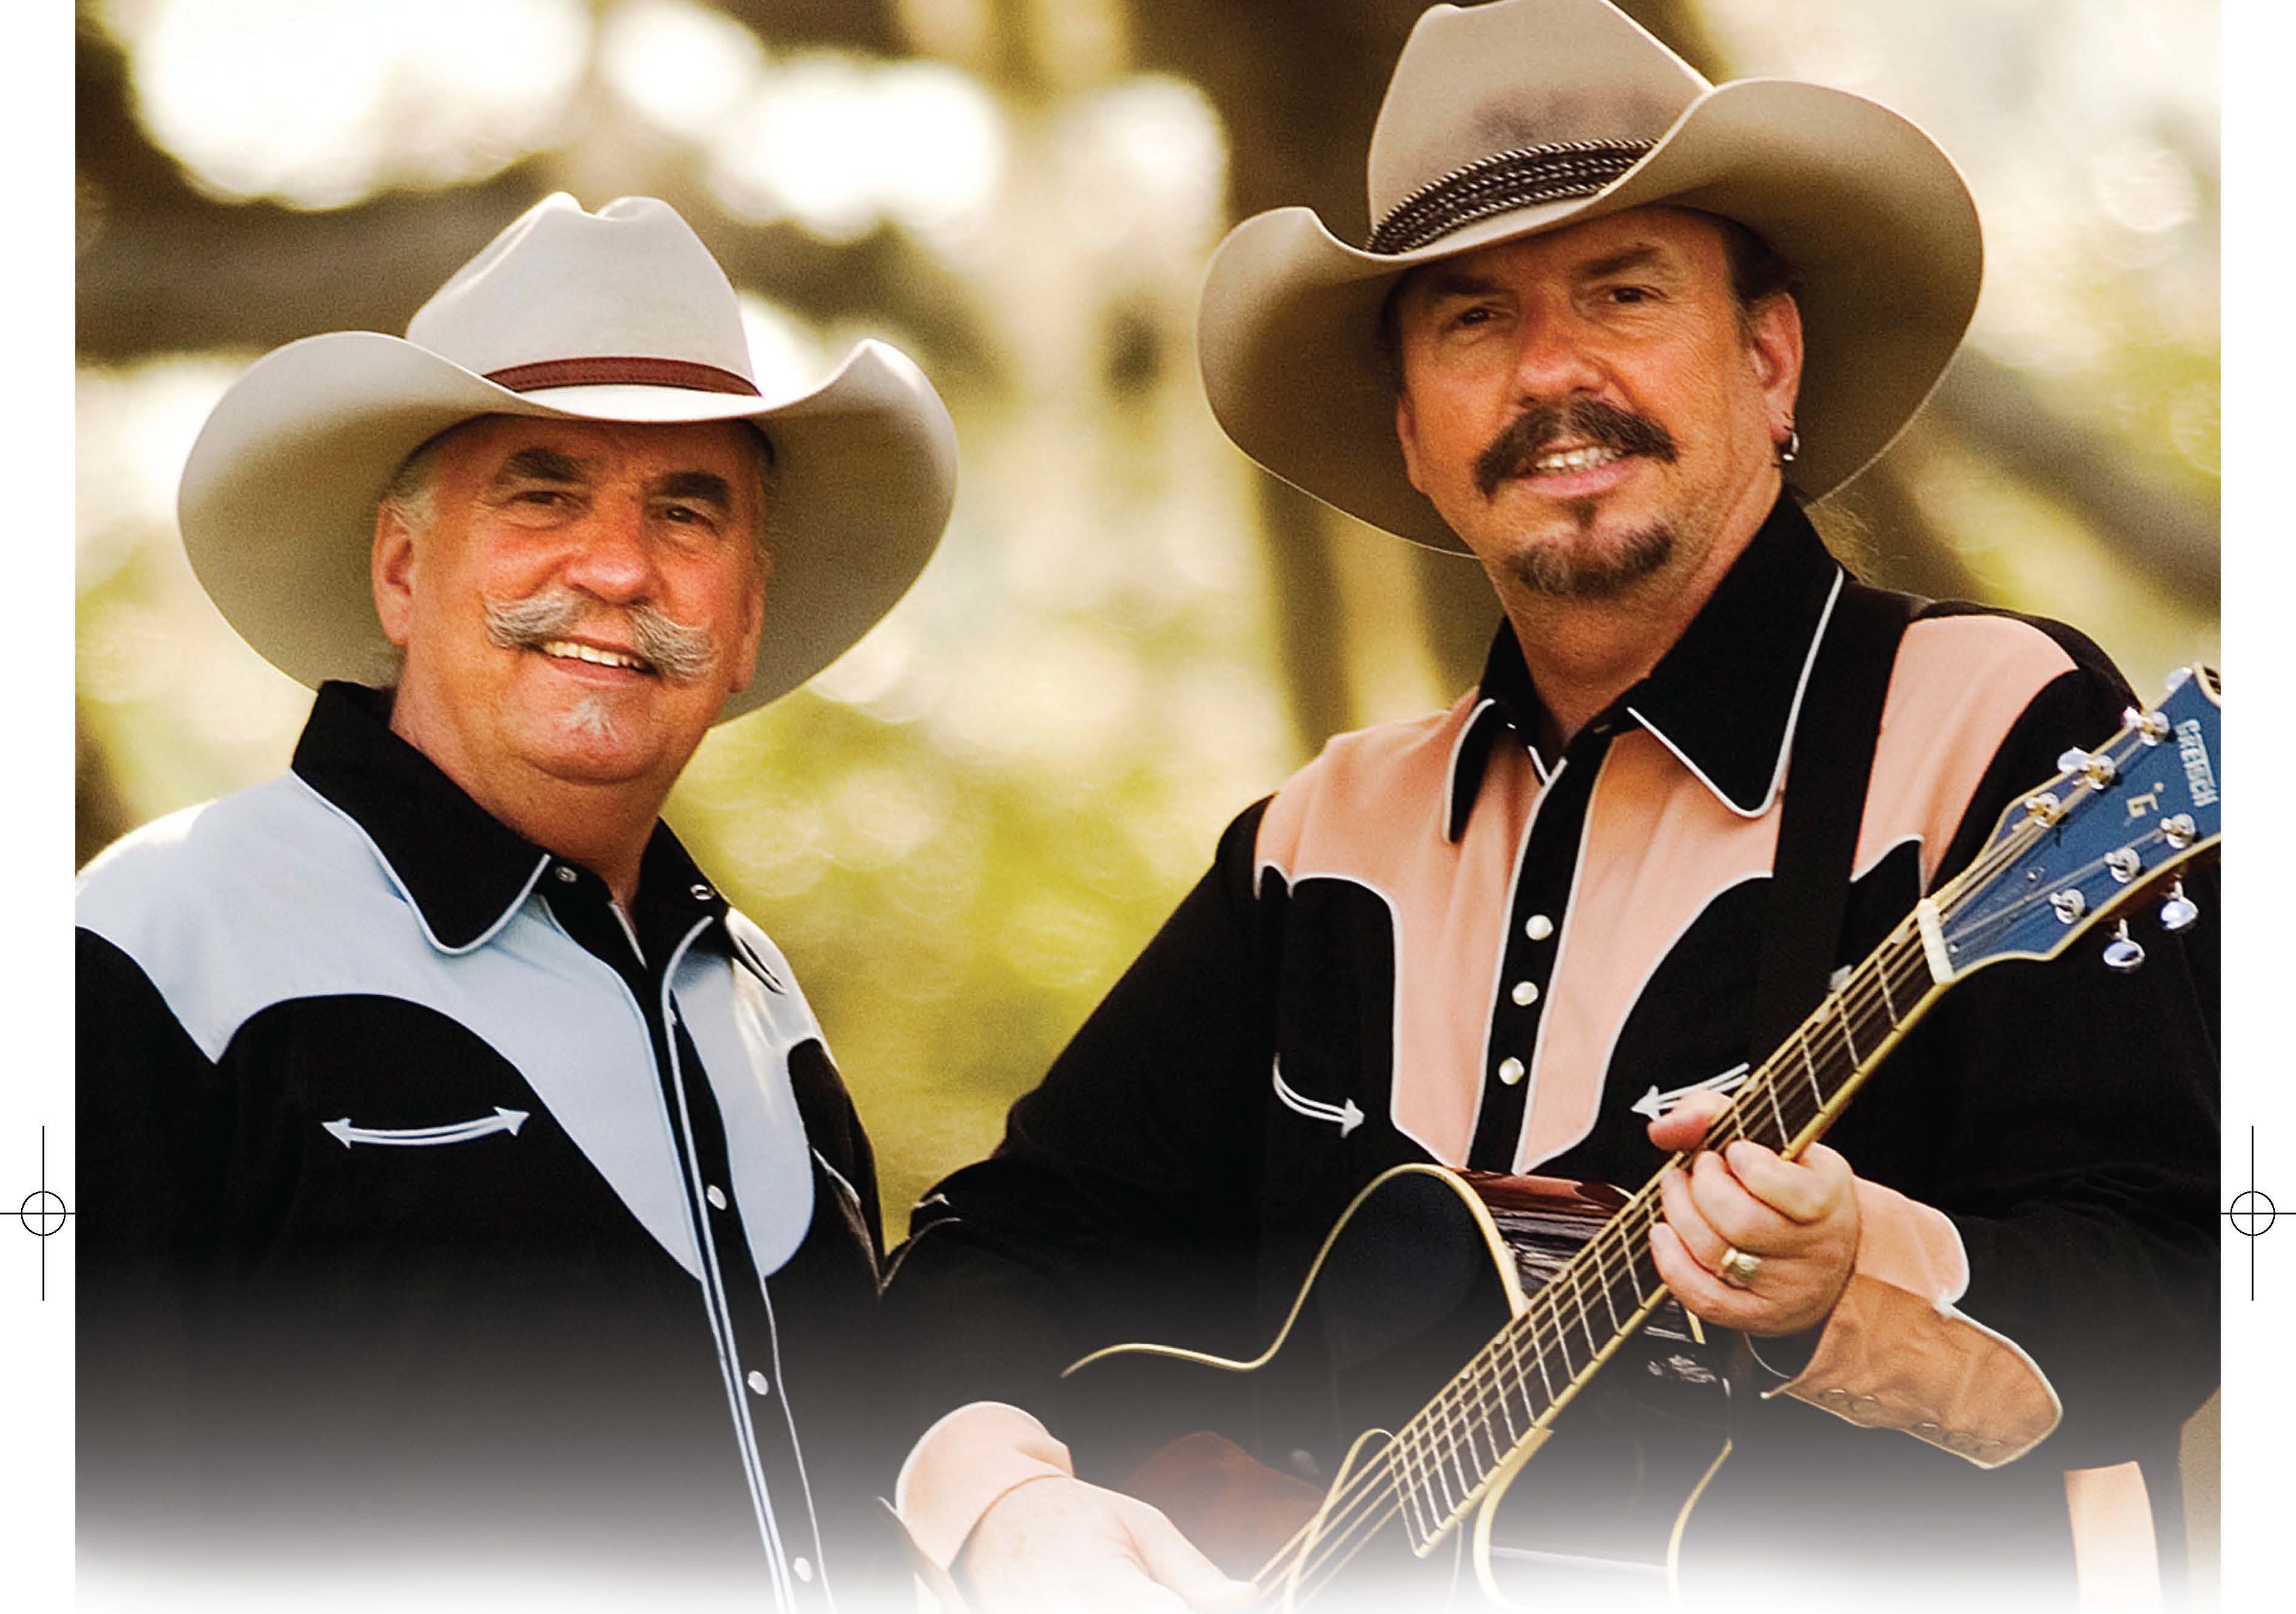 Country Music Duo The Bellamy Brothers Perform For The Troops In